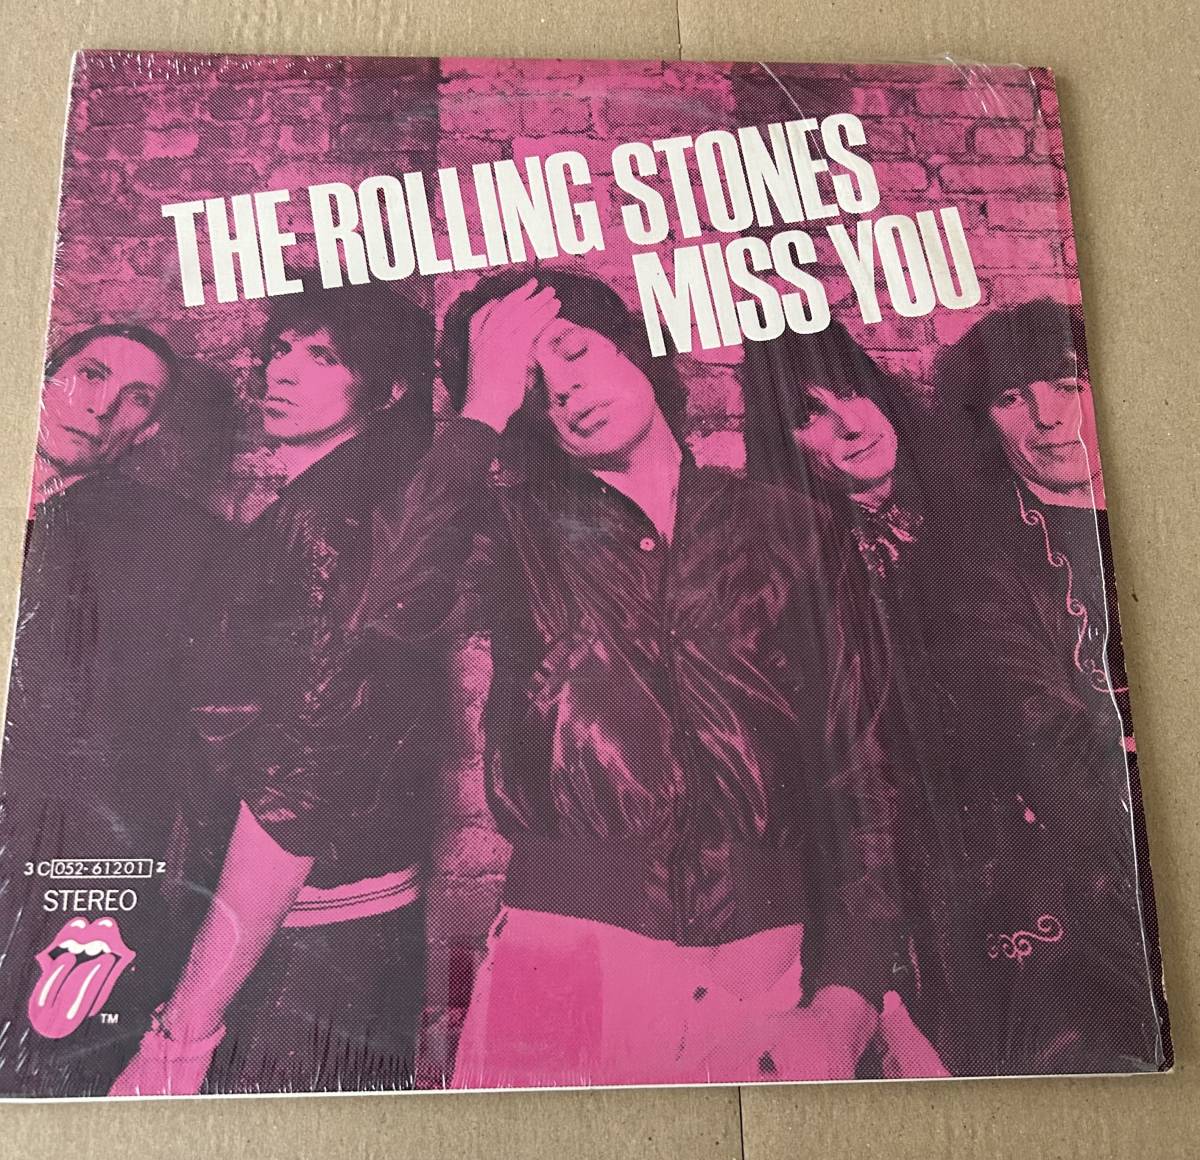 The Rolling Stones Miss You (12inch) (Rolling Stones Records 3C 052-61201 Z) Italy シュリンク_画像1